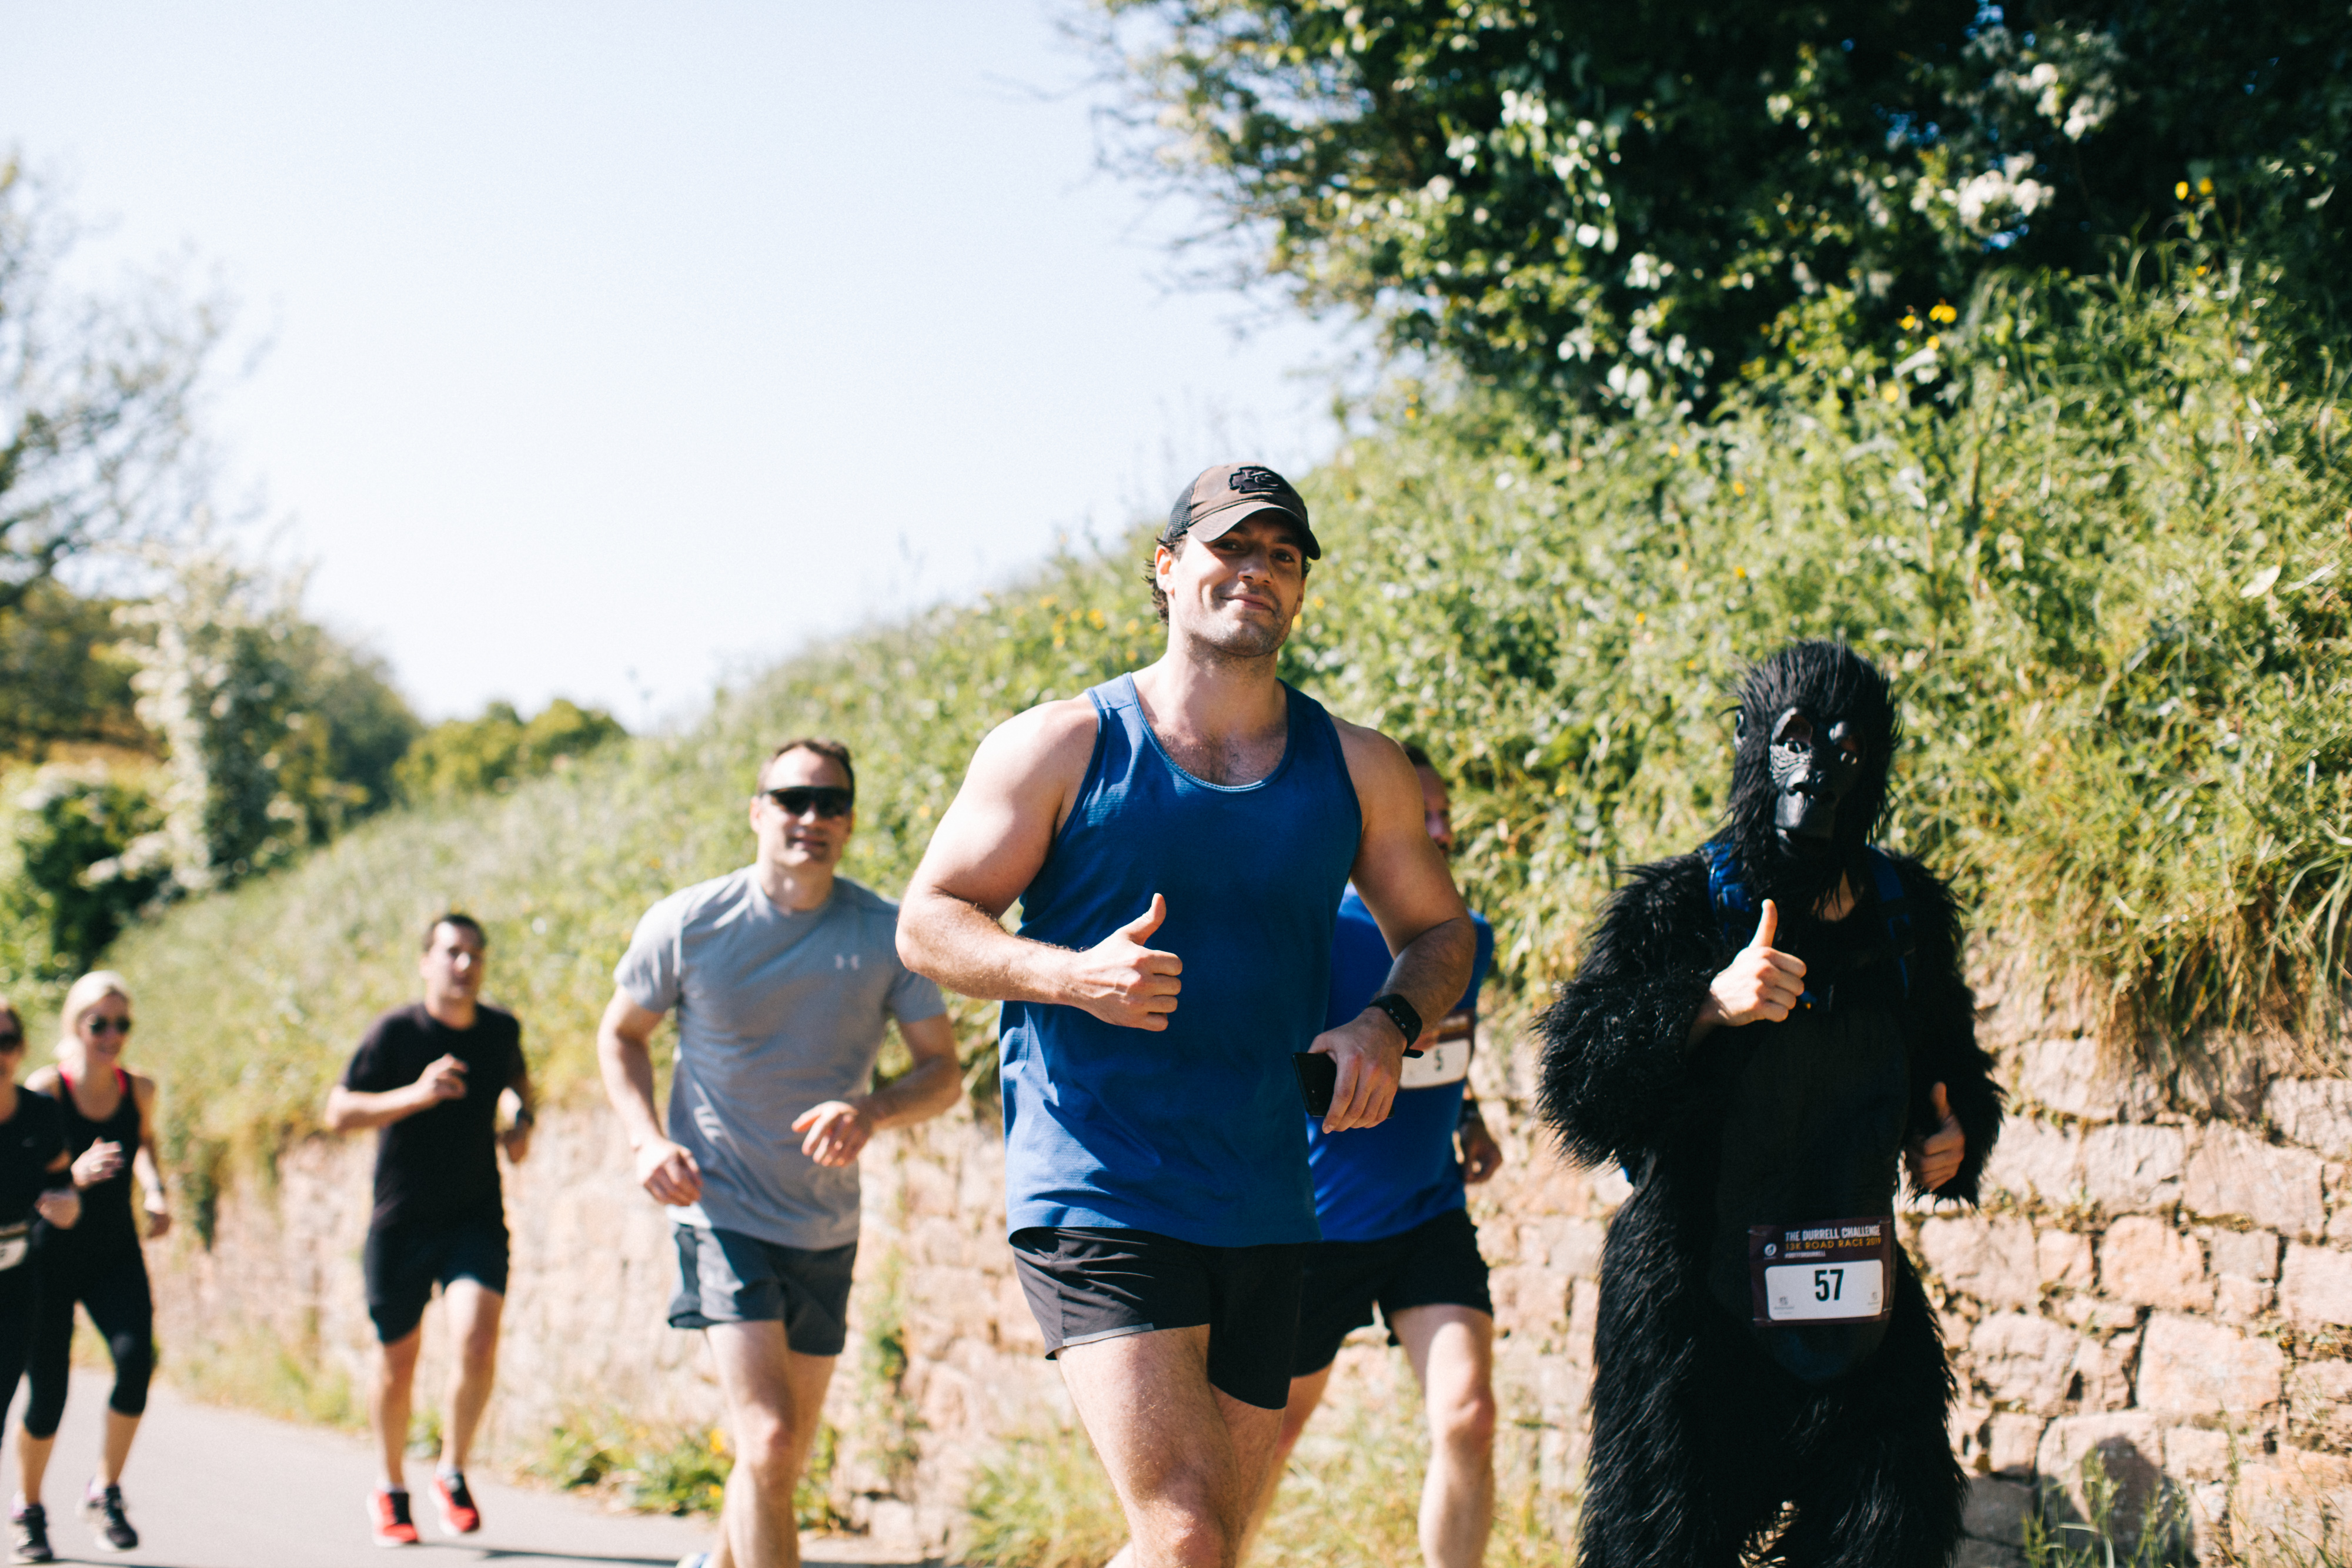 The Durrell Challenge returns for 2020 Bailiwick Express